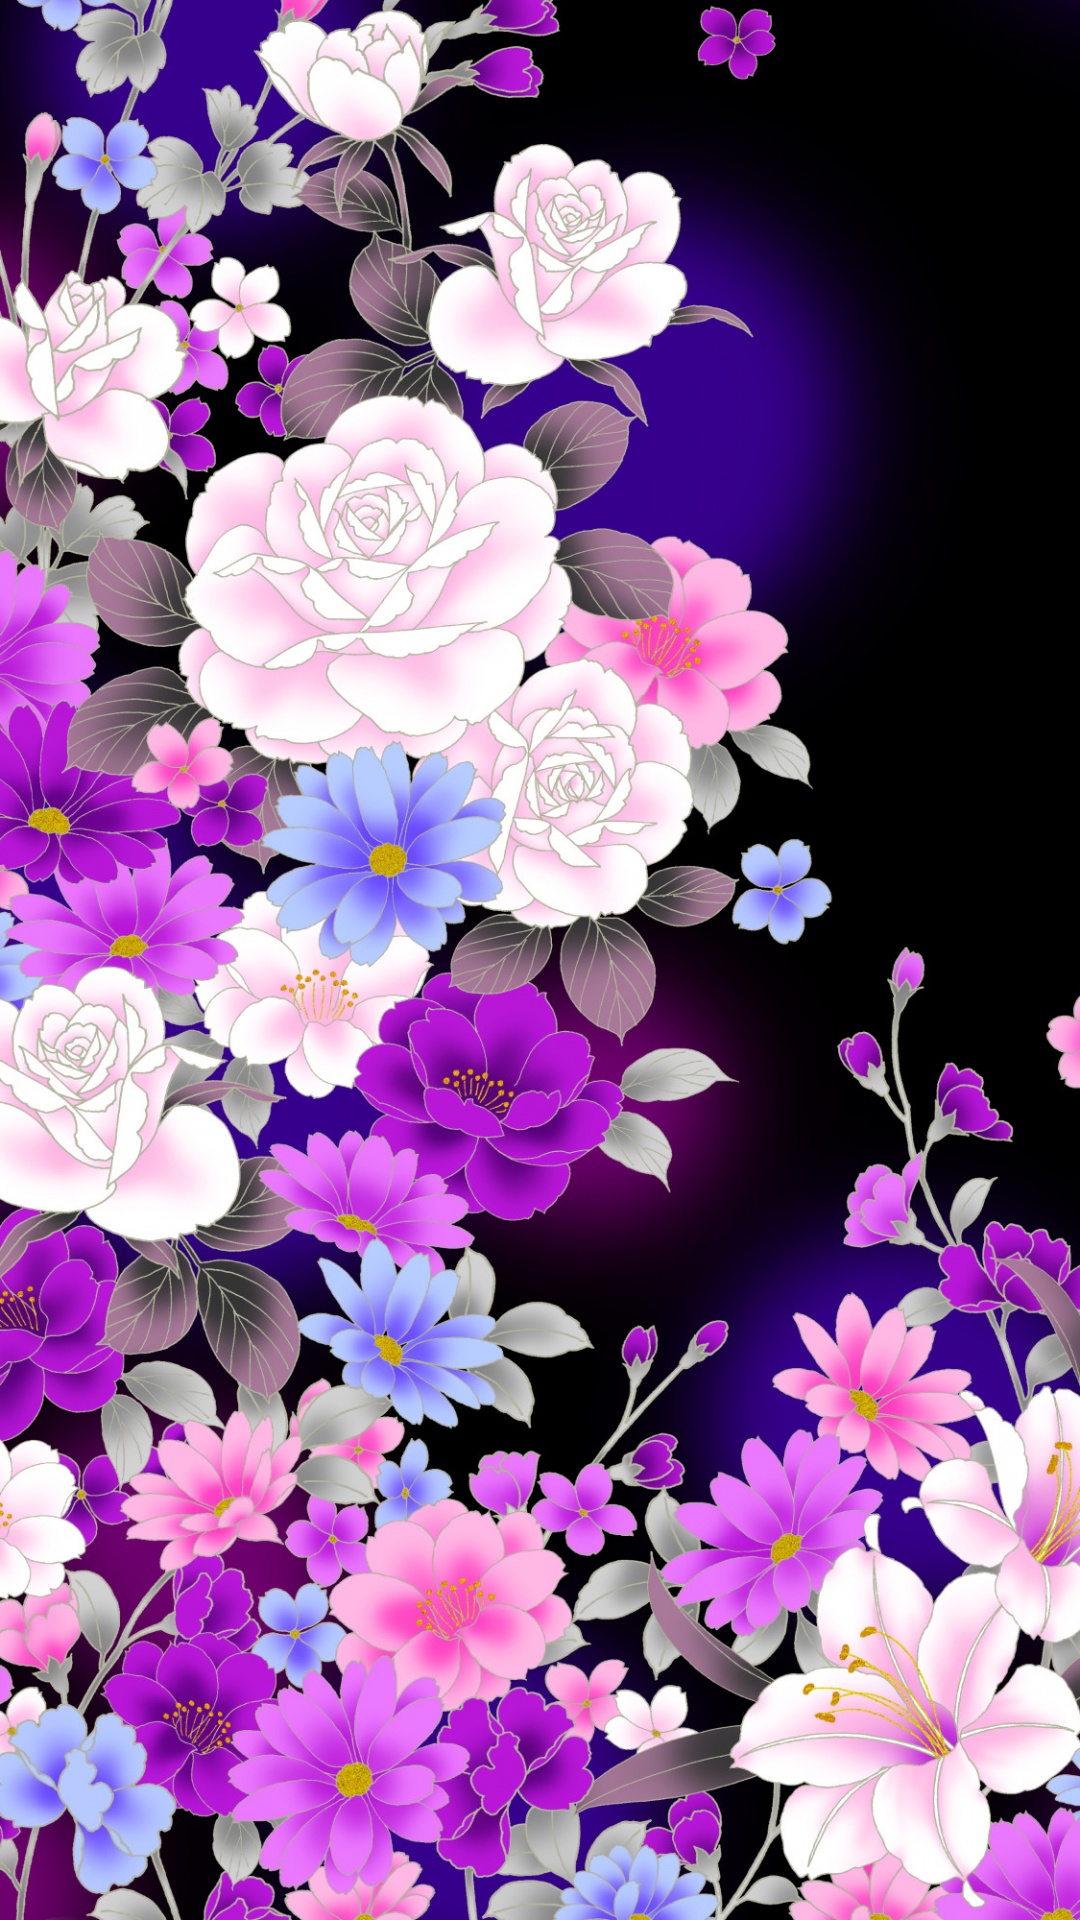 Purple and White Flowers With Green Leaves. Wallpaper in 1080x1920 Resolution